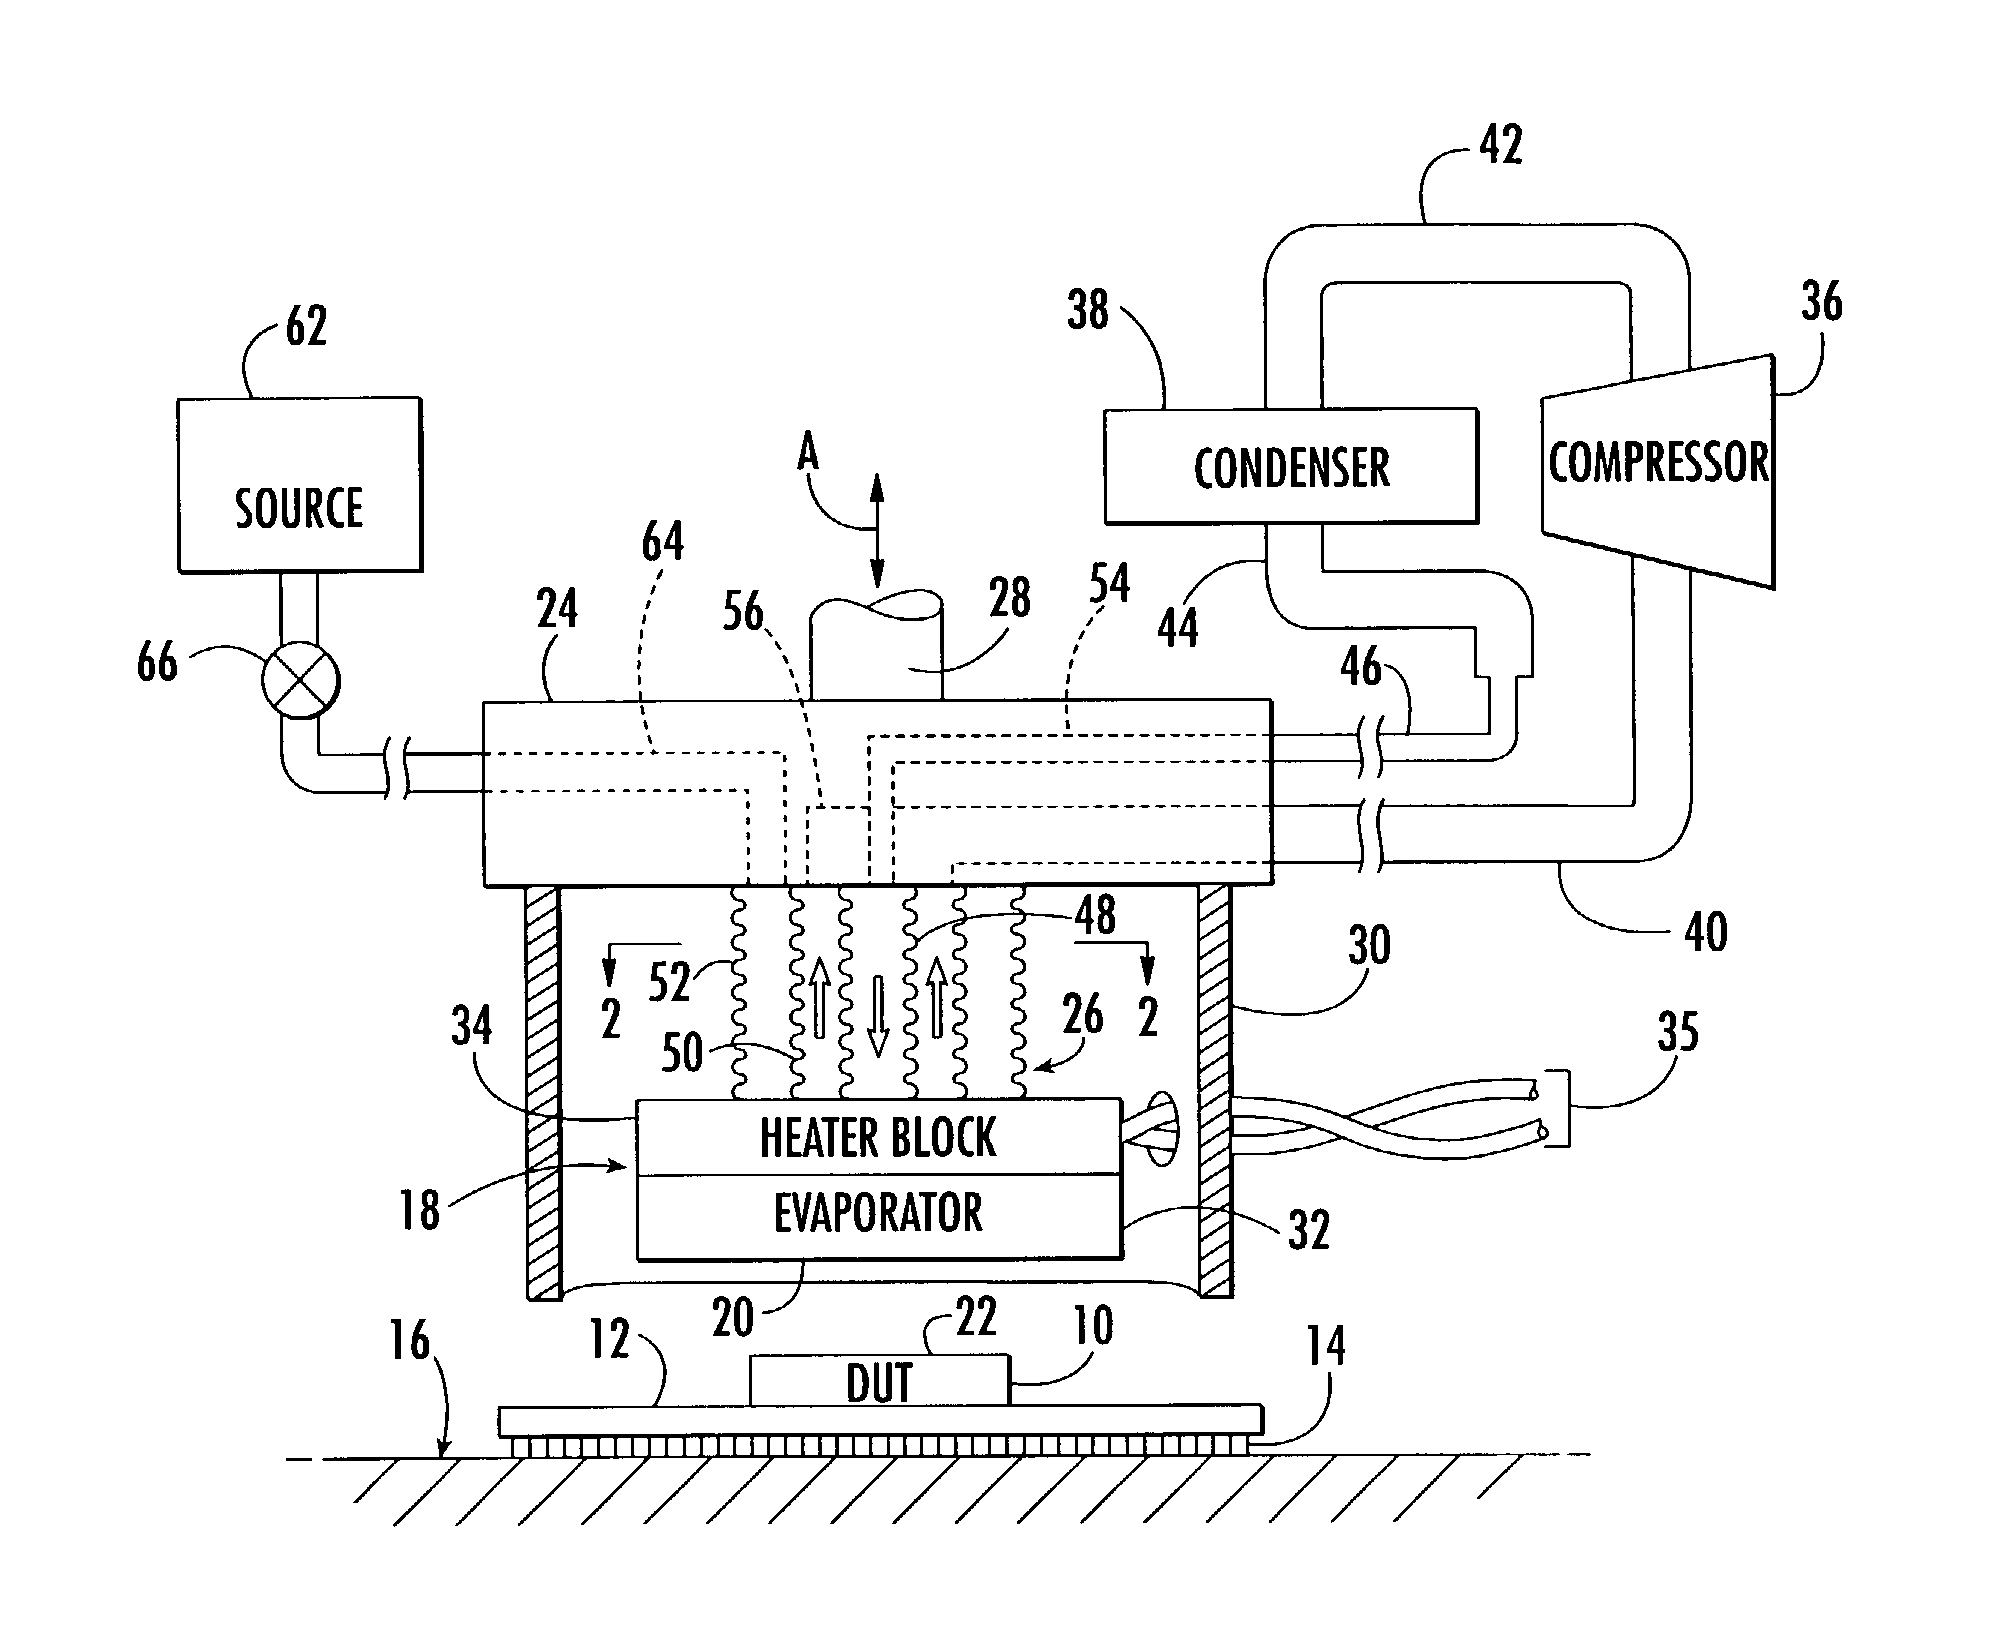 Apparatus and method having mechanical isolation arrangement for controlling the temperature of an electronic device under test